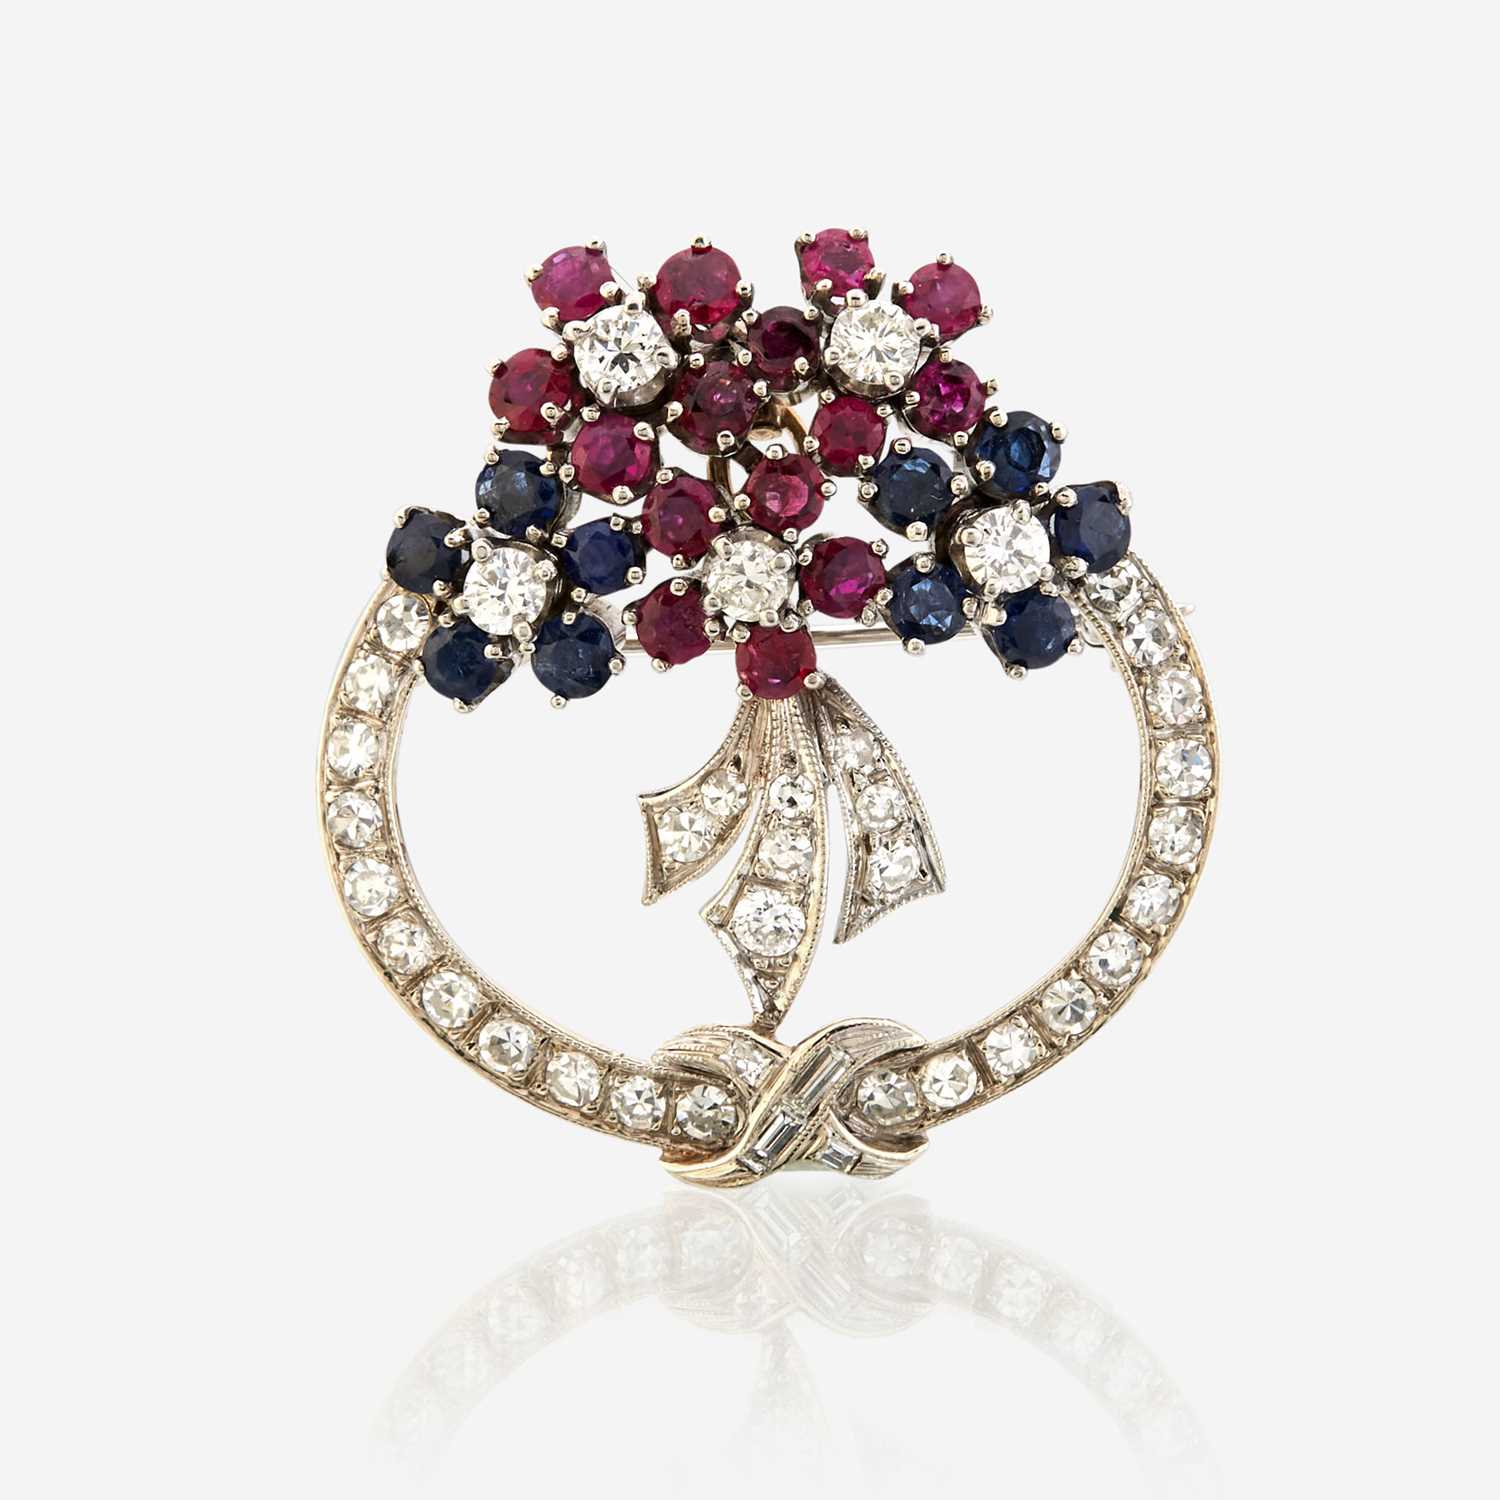 Lot 40 - A diamond, ruby, sapphire, and white gold pendant/brooch